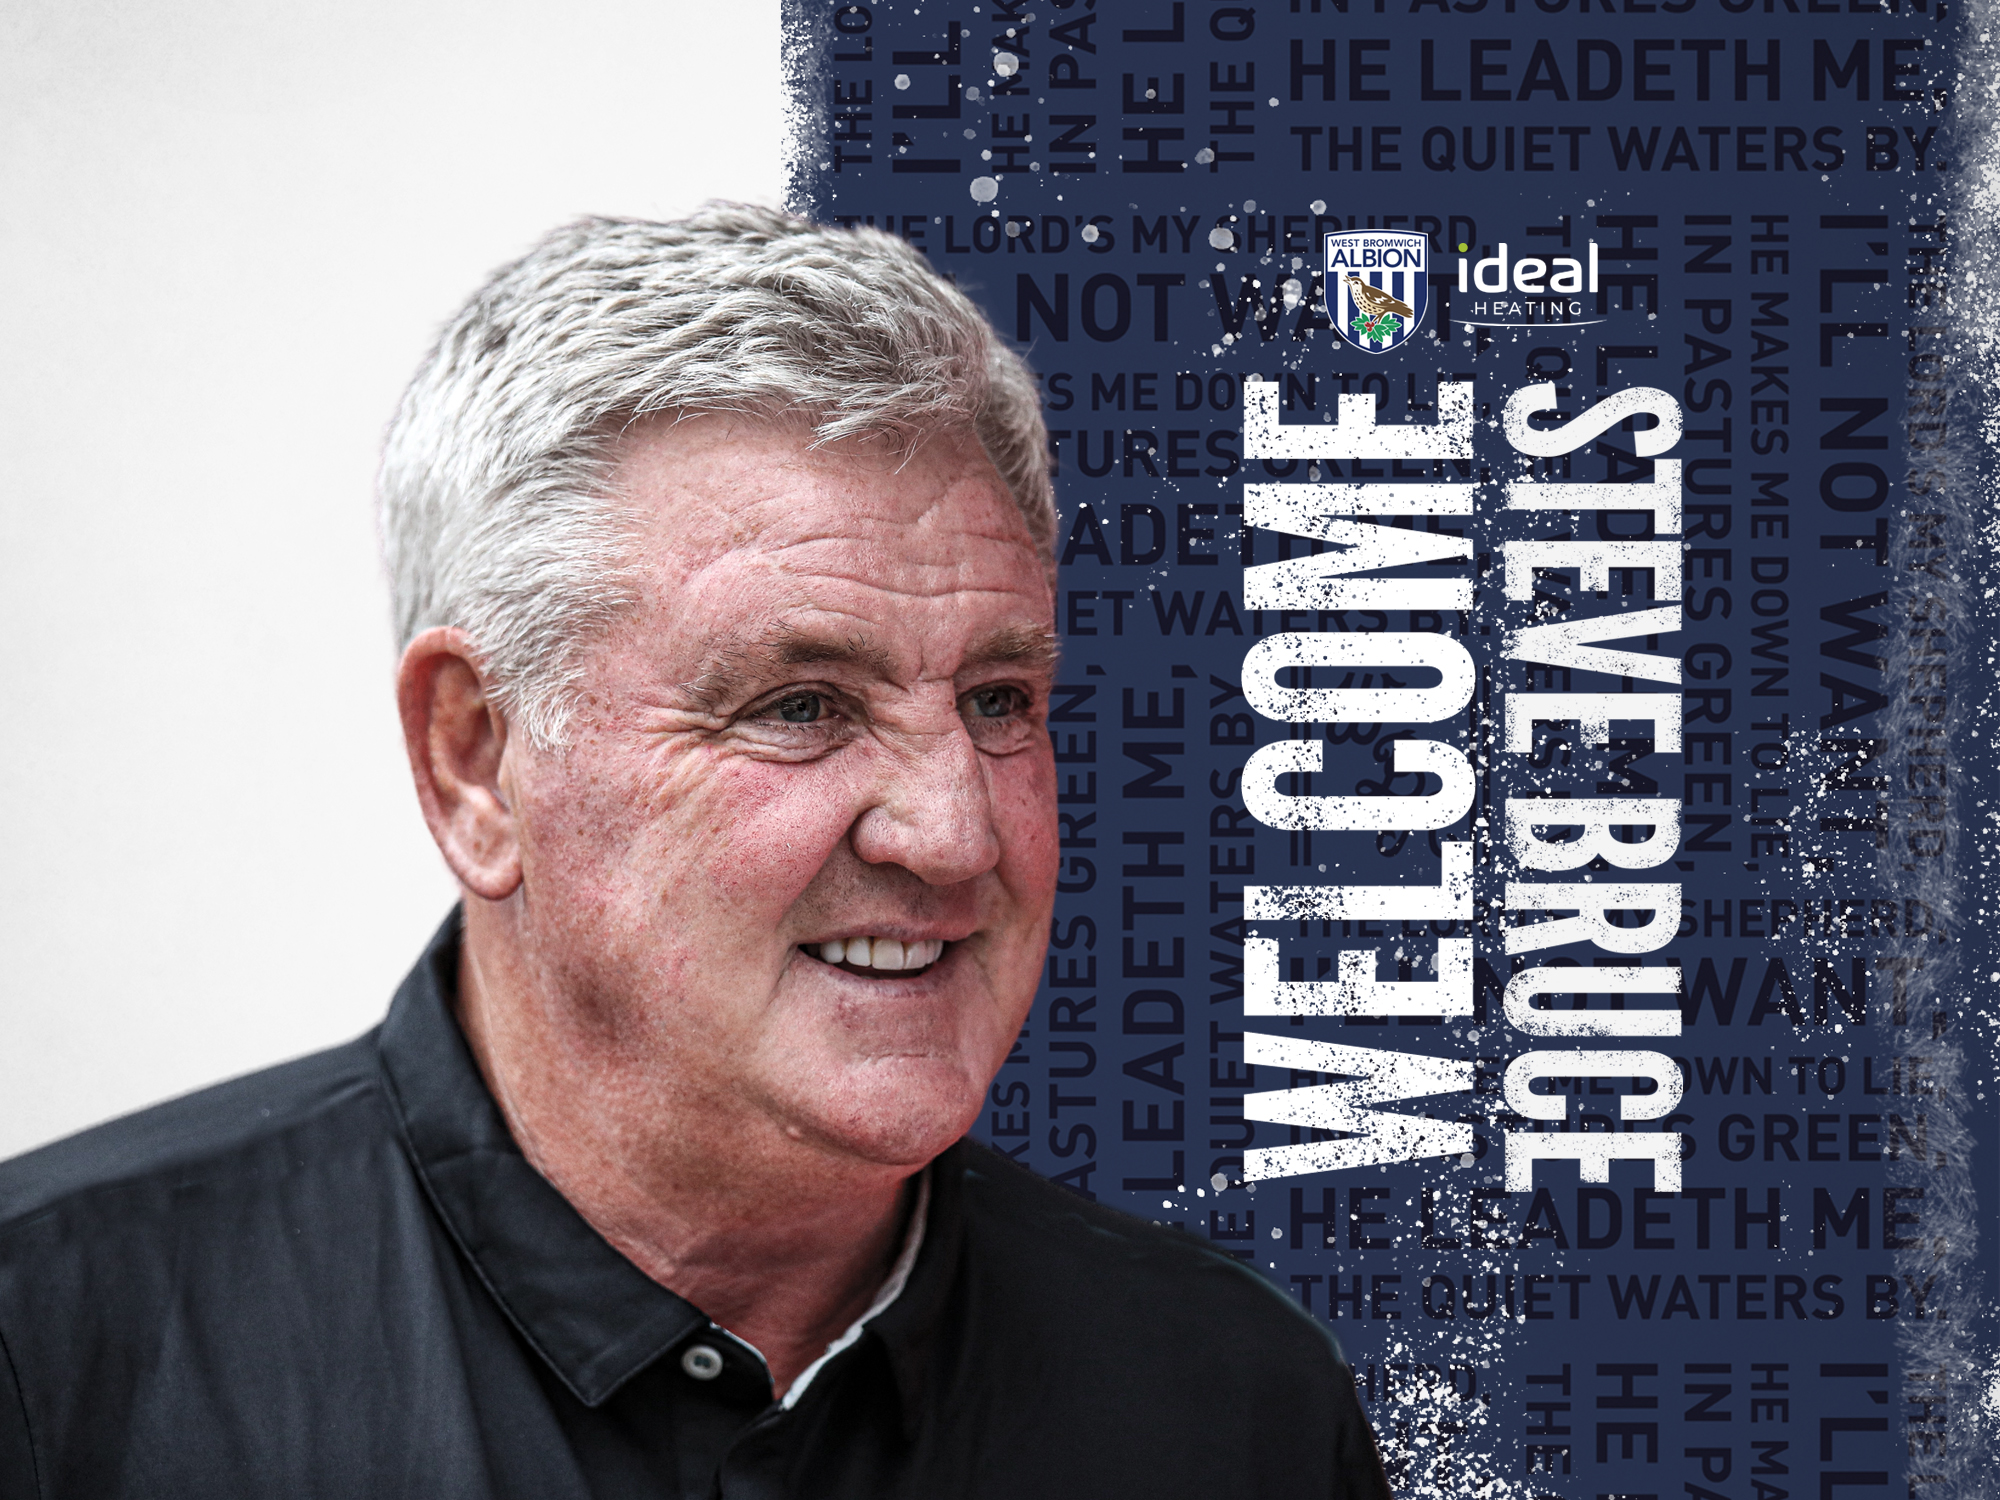 West Bromwich Albion Football Club is delighted to announce the appointment of Steve Bruce as its new Manager